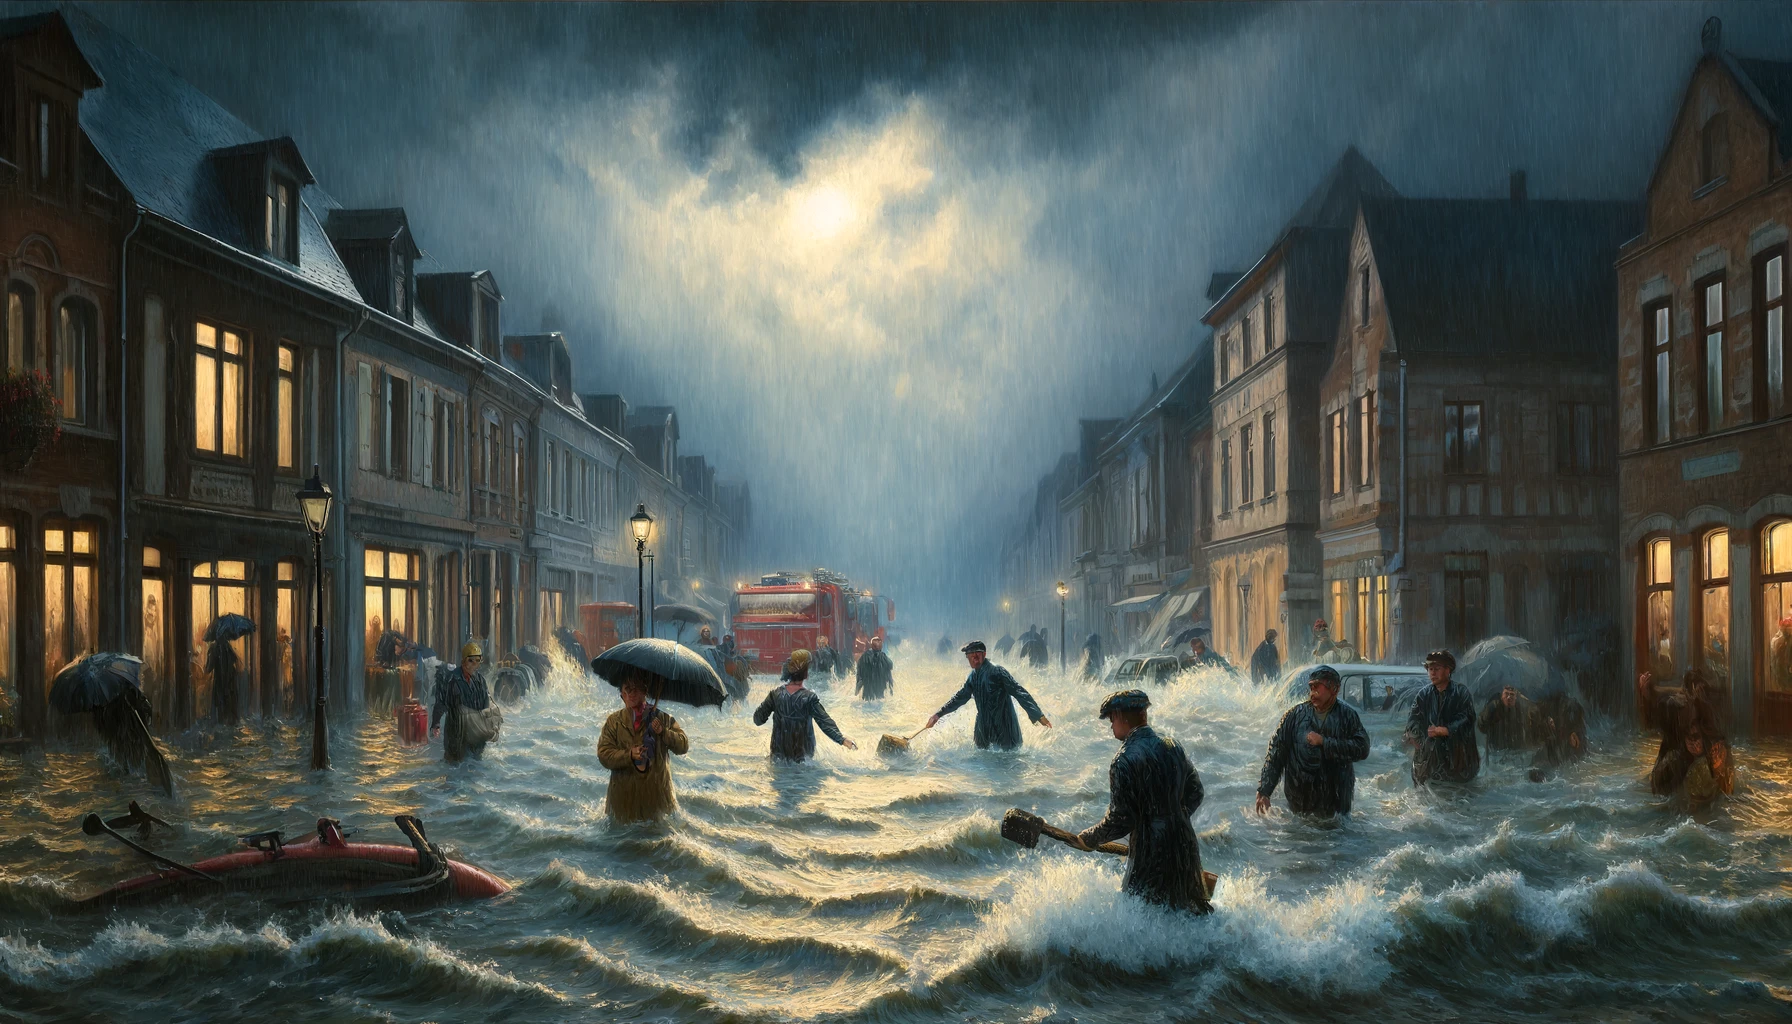 DALL·E 2024 05 31 13.13.39 An oil painting in the style of Monet A dramatic scene with heavy rain and flooded streets in a German city. People are wading through the water with